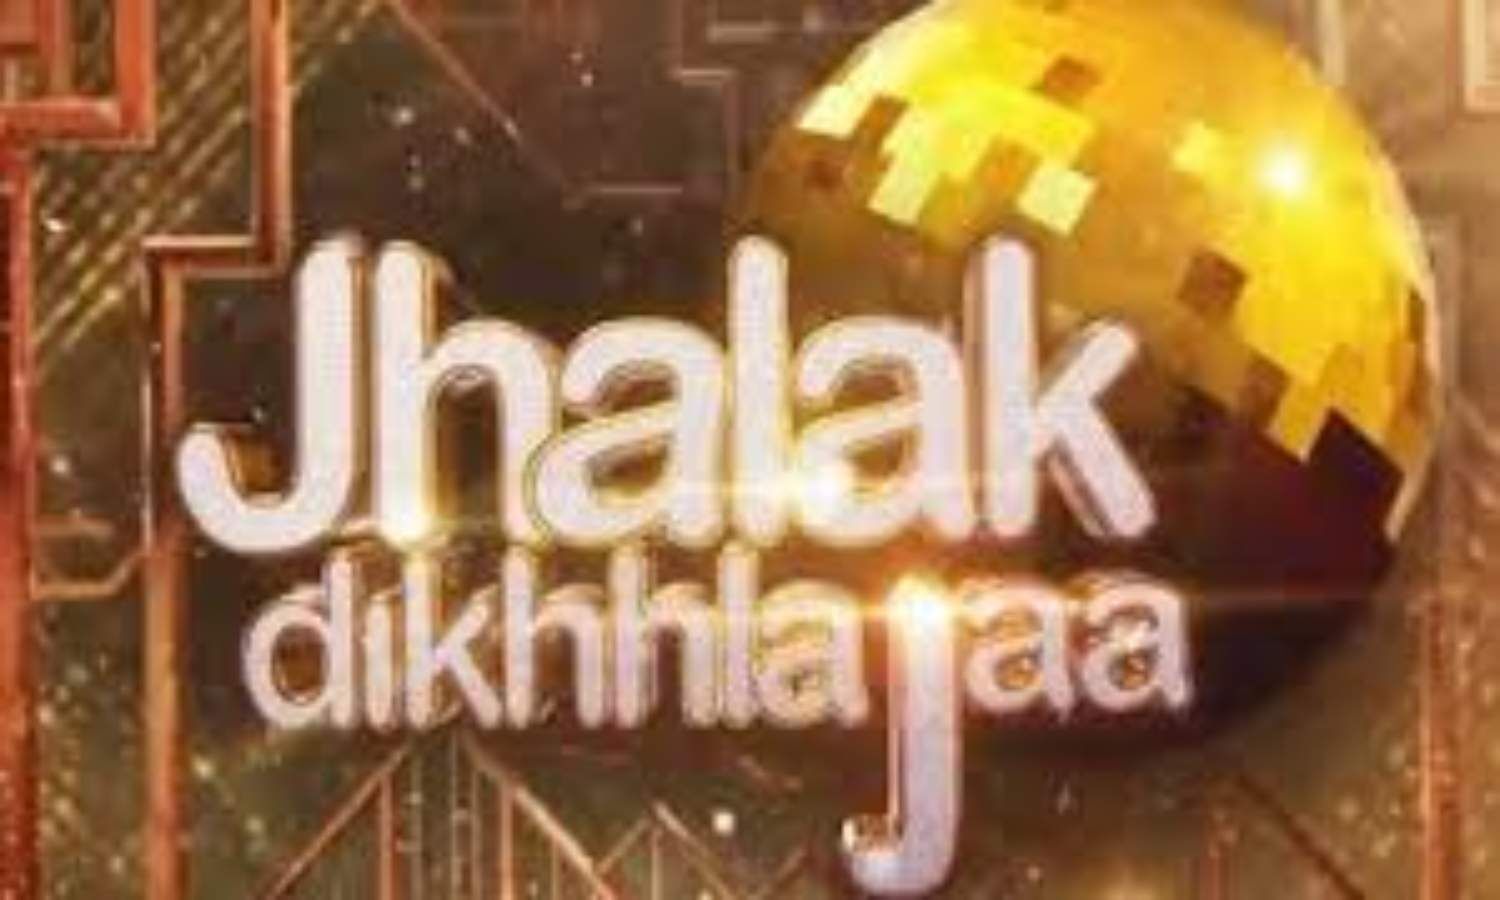 Jhalak Dikhhla Jaa 10: This time everyone will be in tears in the show, some get emotional after remembering their mother and some their father